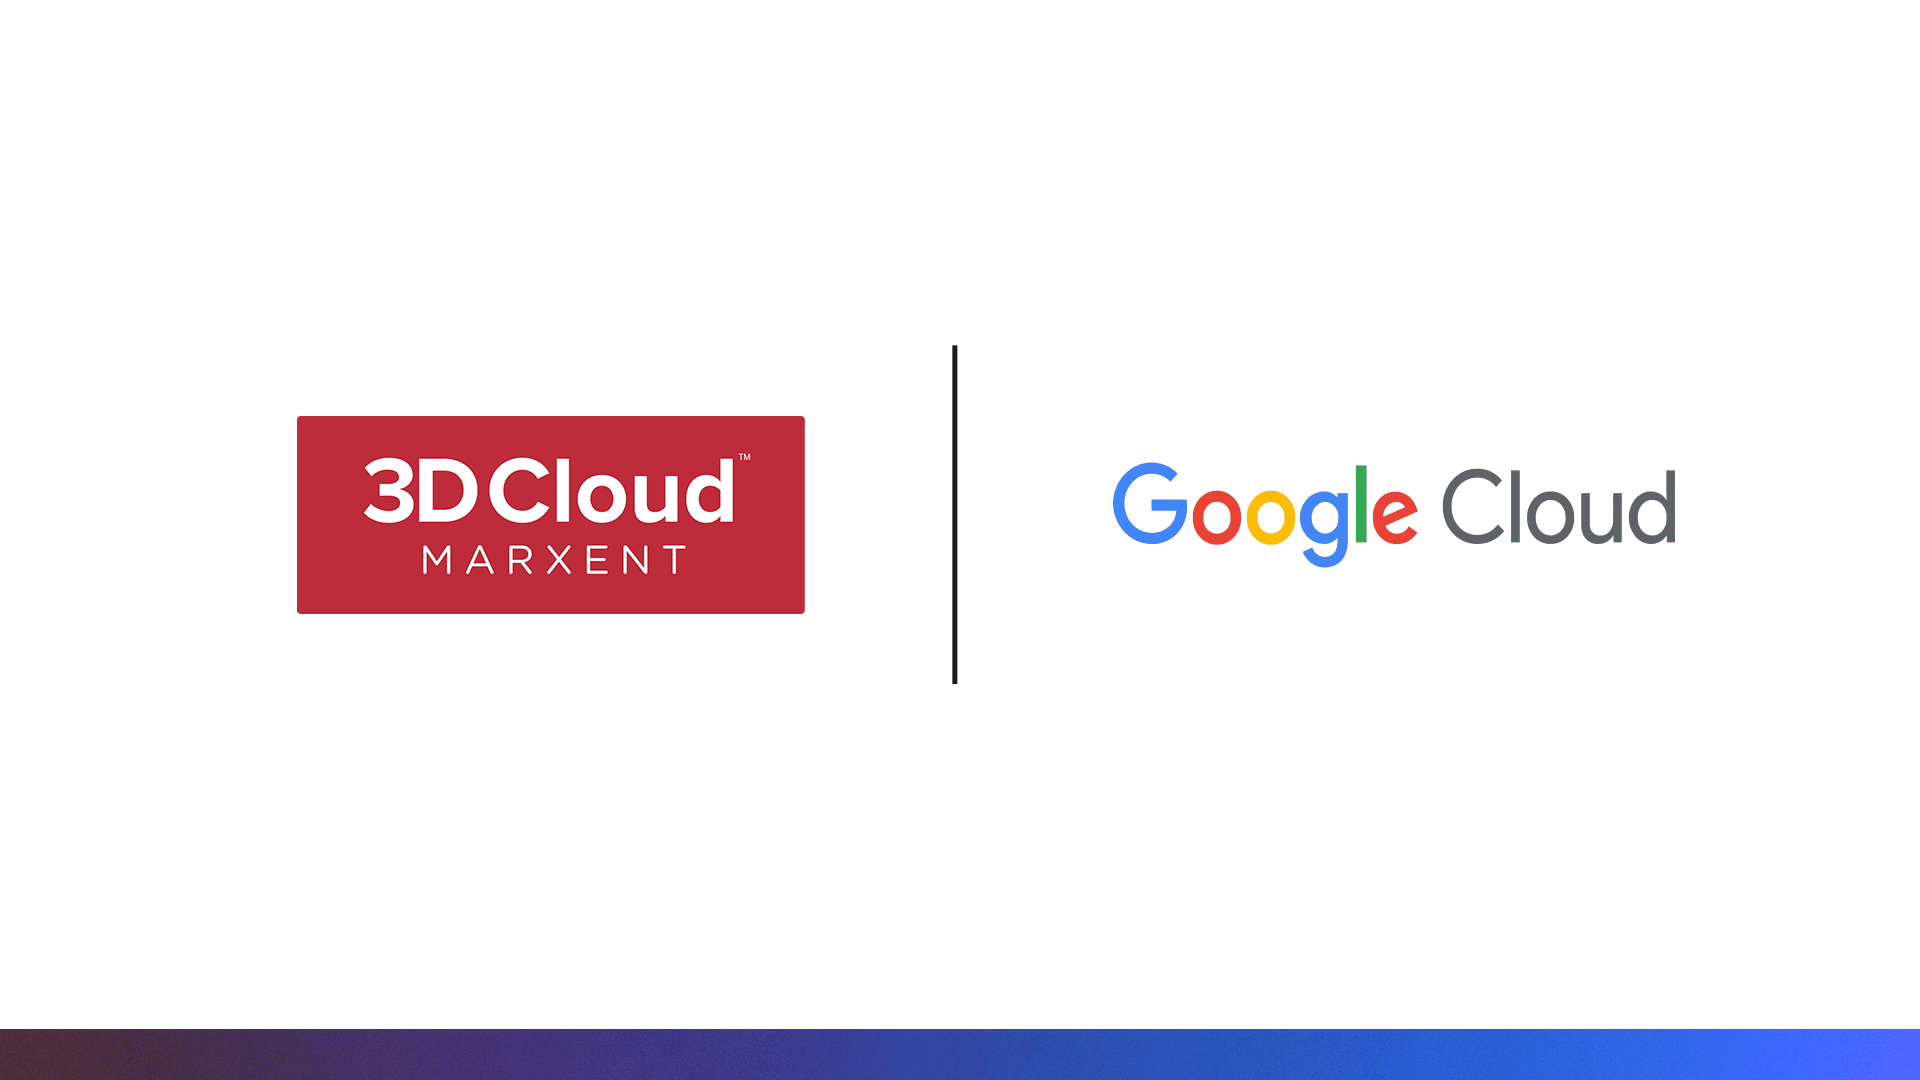 3D Cloud by Marxent Joins Google Cloud Marketplace as One of the First 3D Platform Offerings